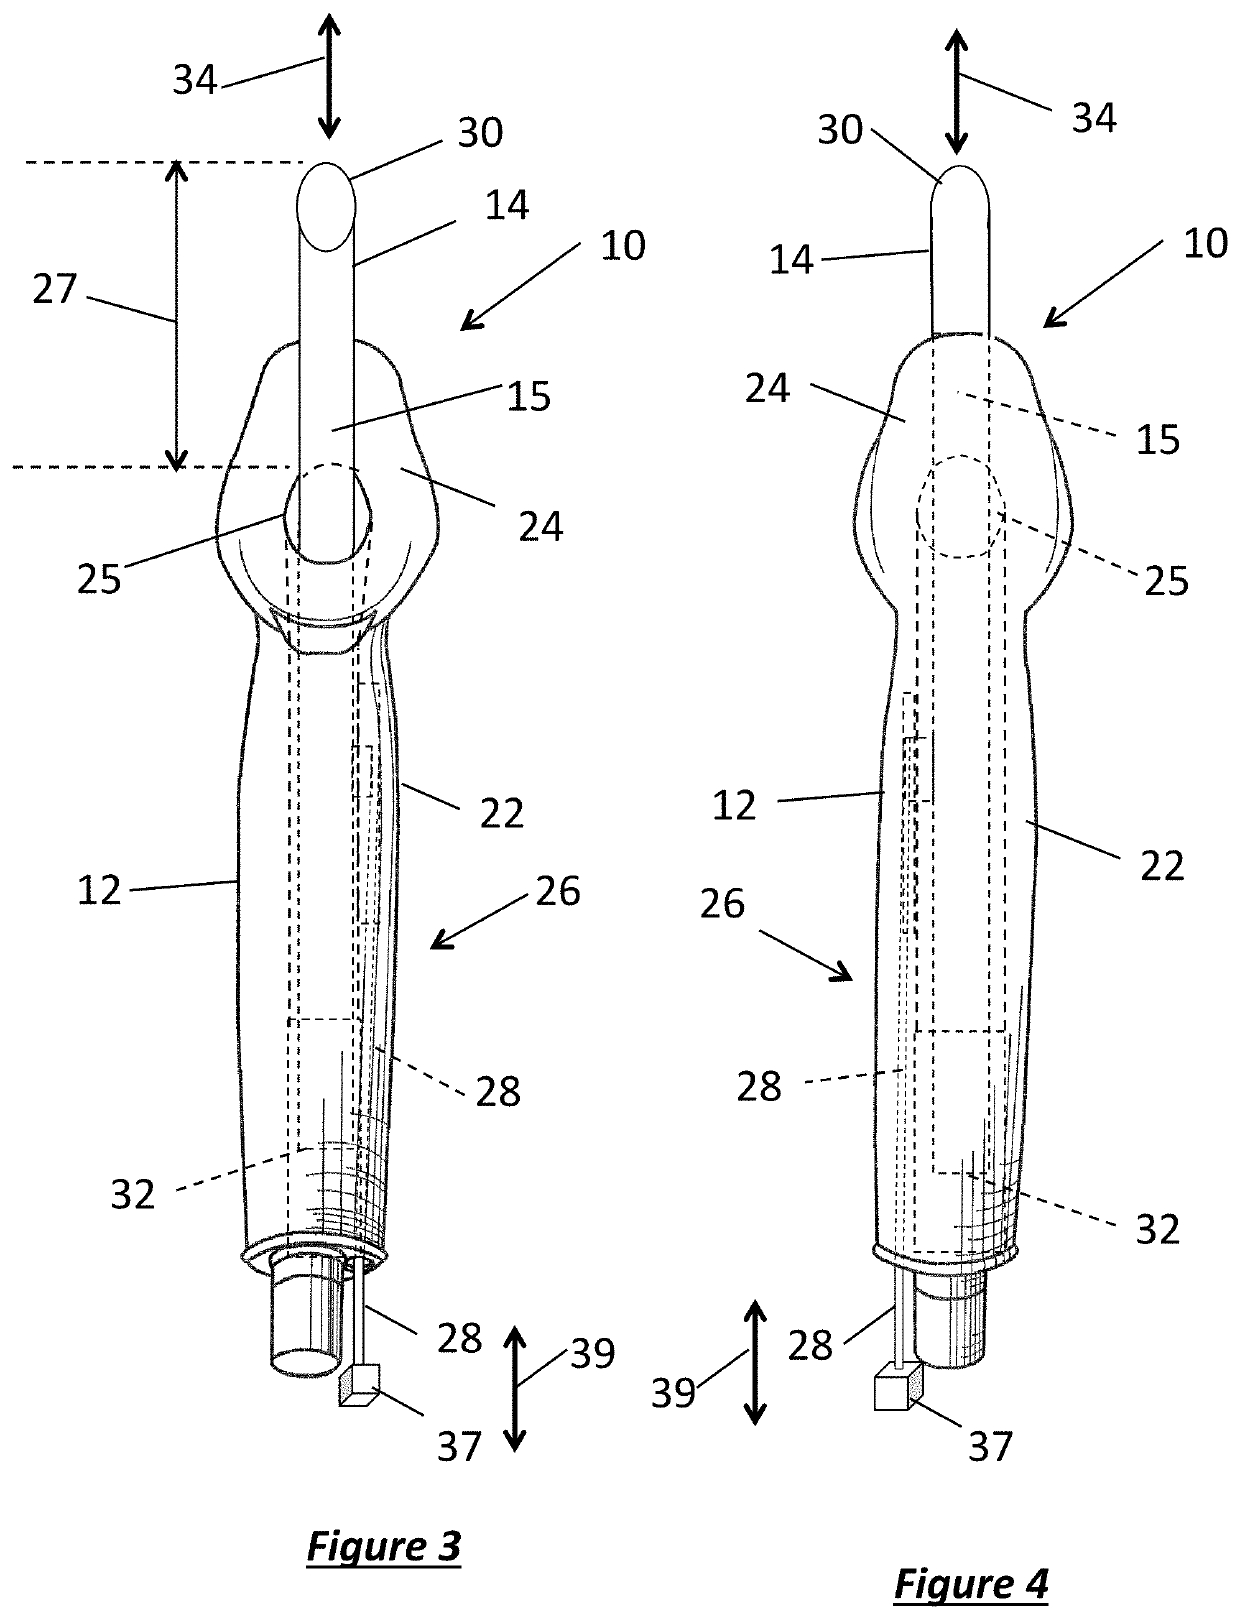 Intubation devices and methods of use